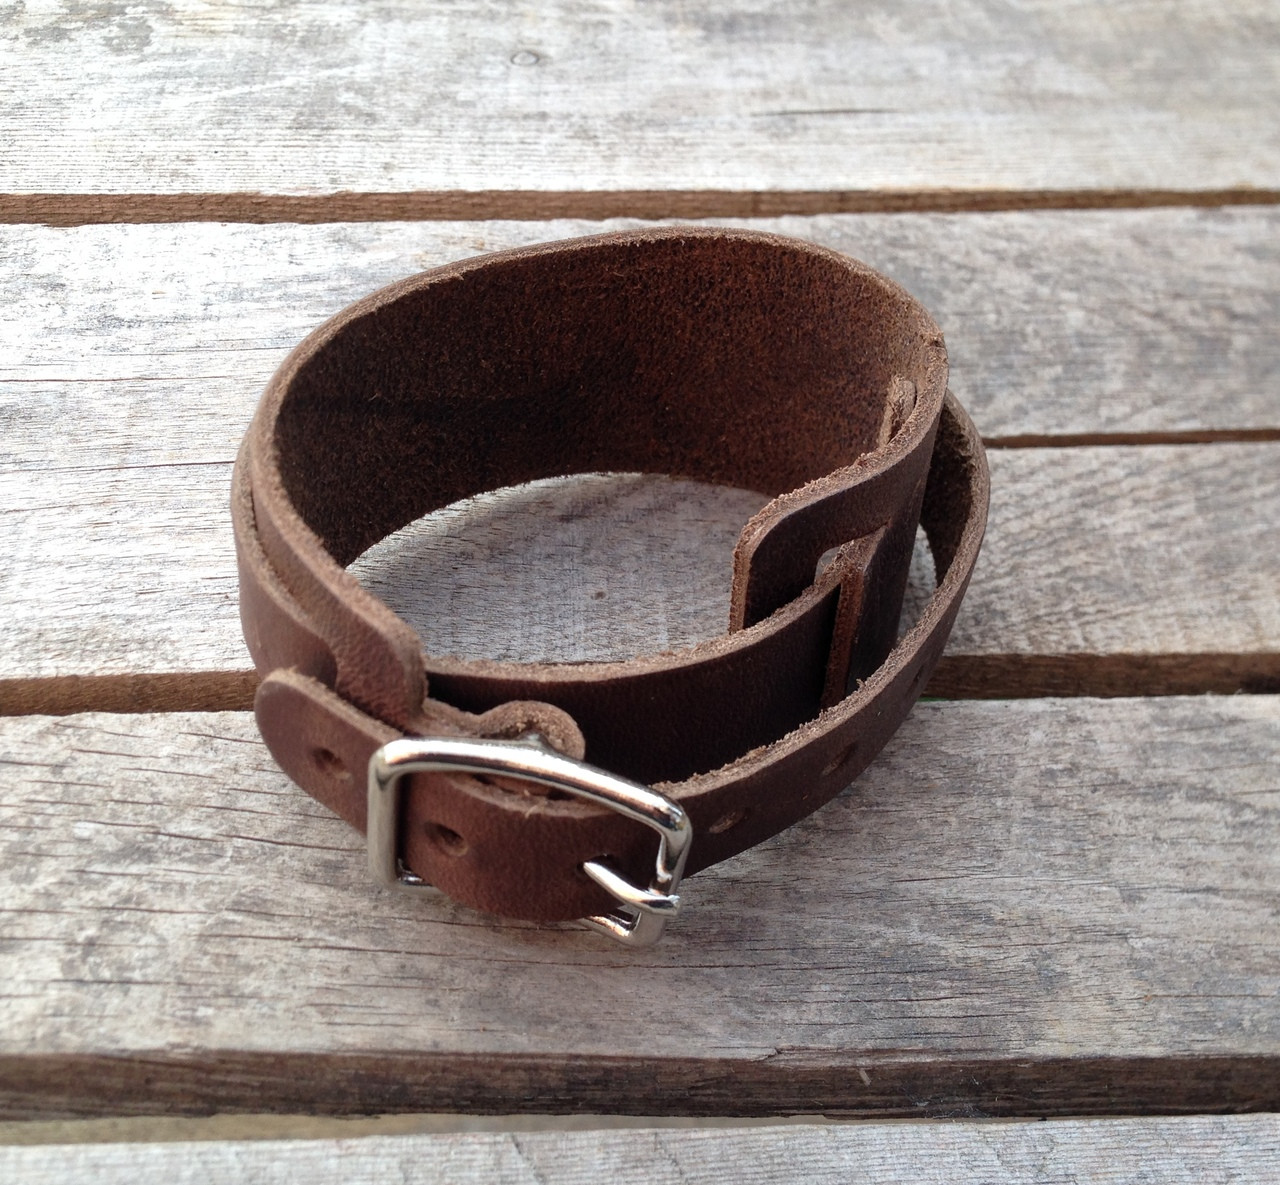 leather wrist band with buckle